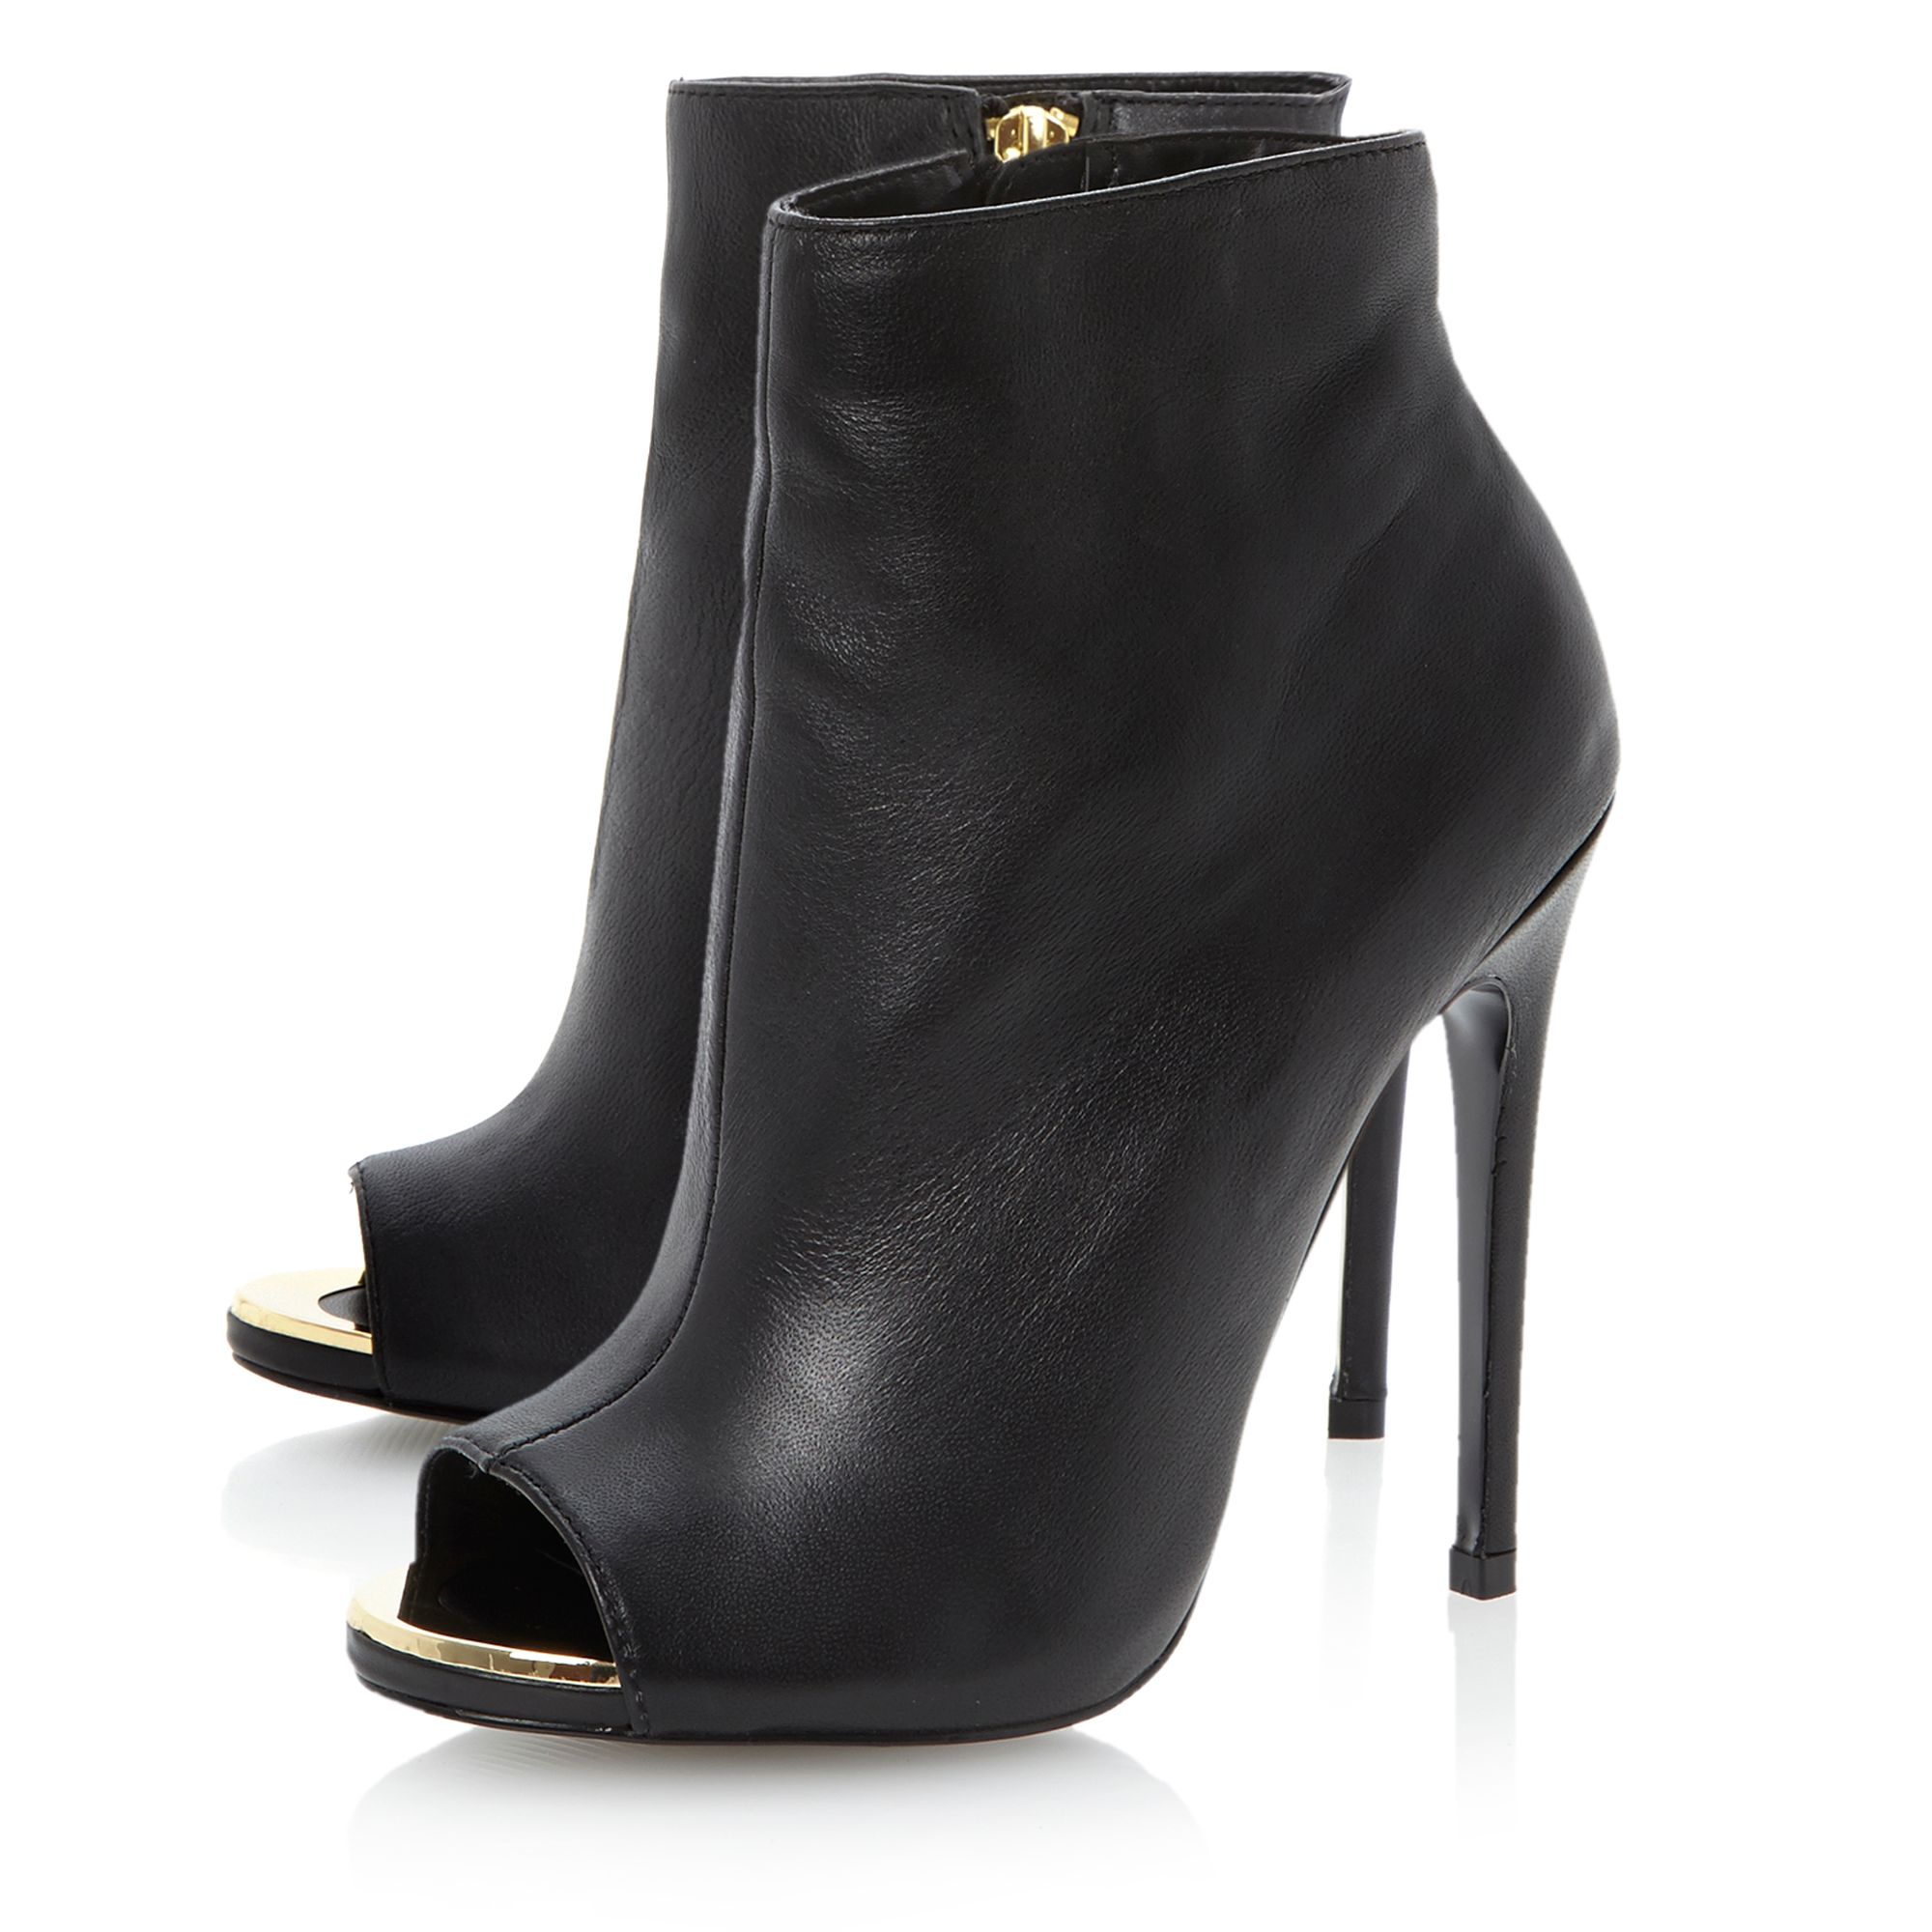 Steve Madden Dianna Sm Peep Toe Ankle Boots in Black - Lyst